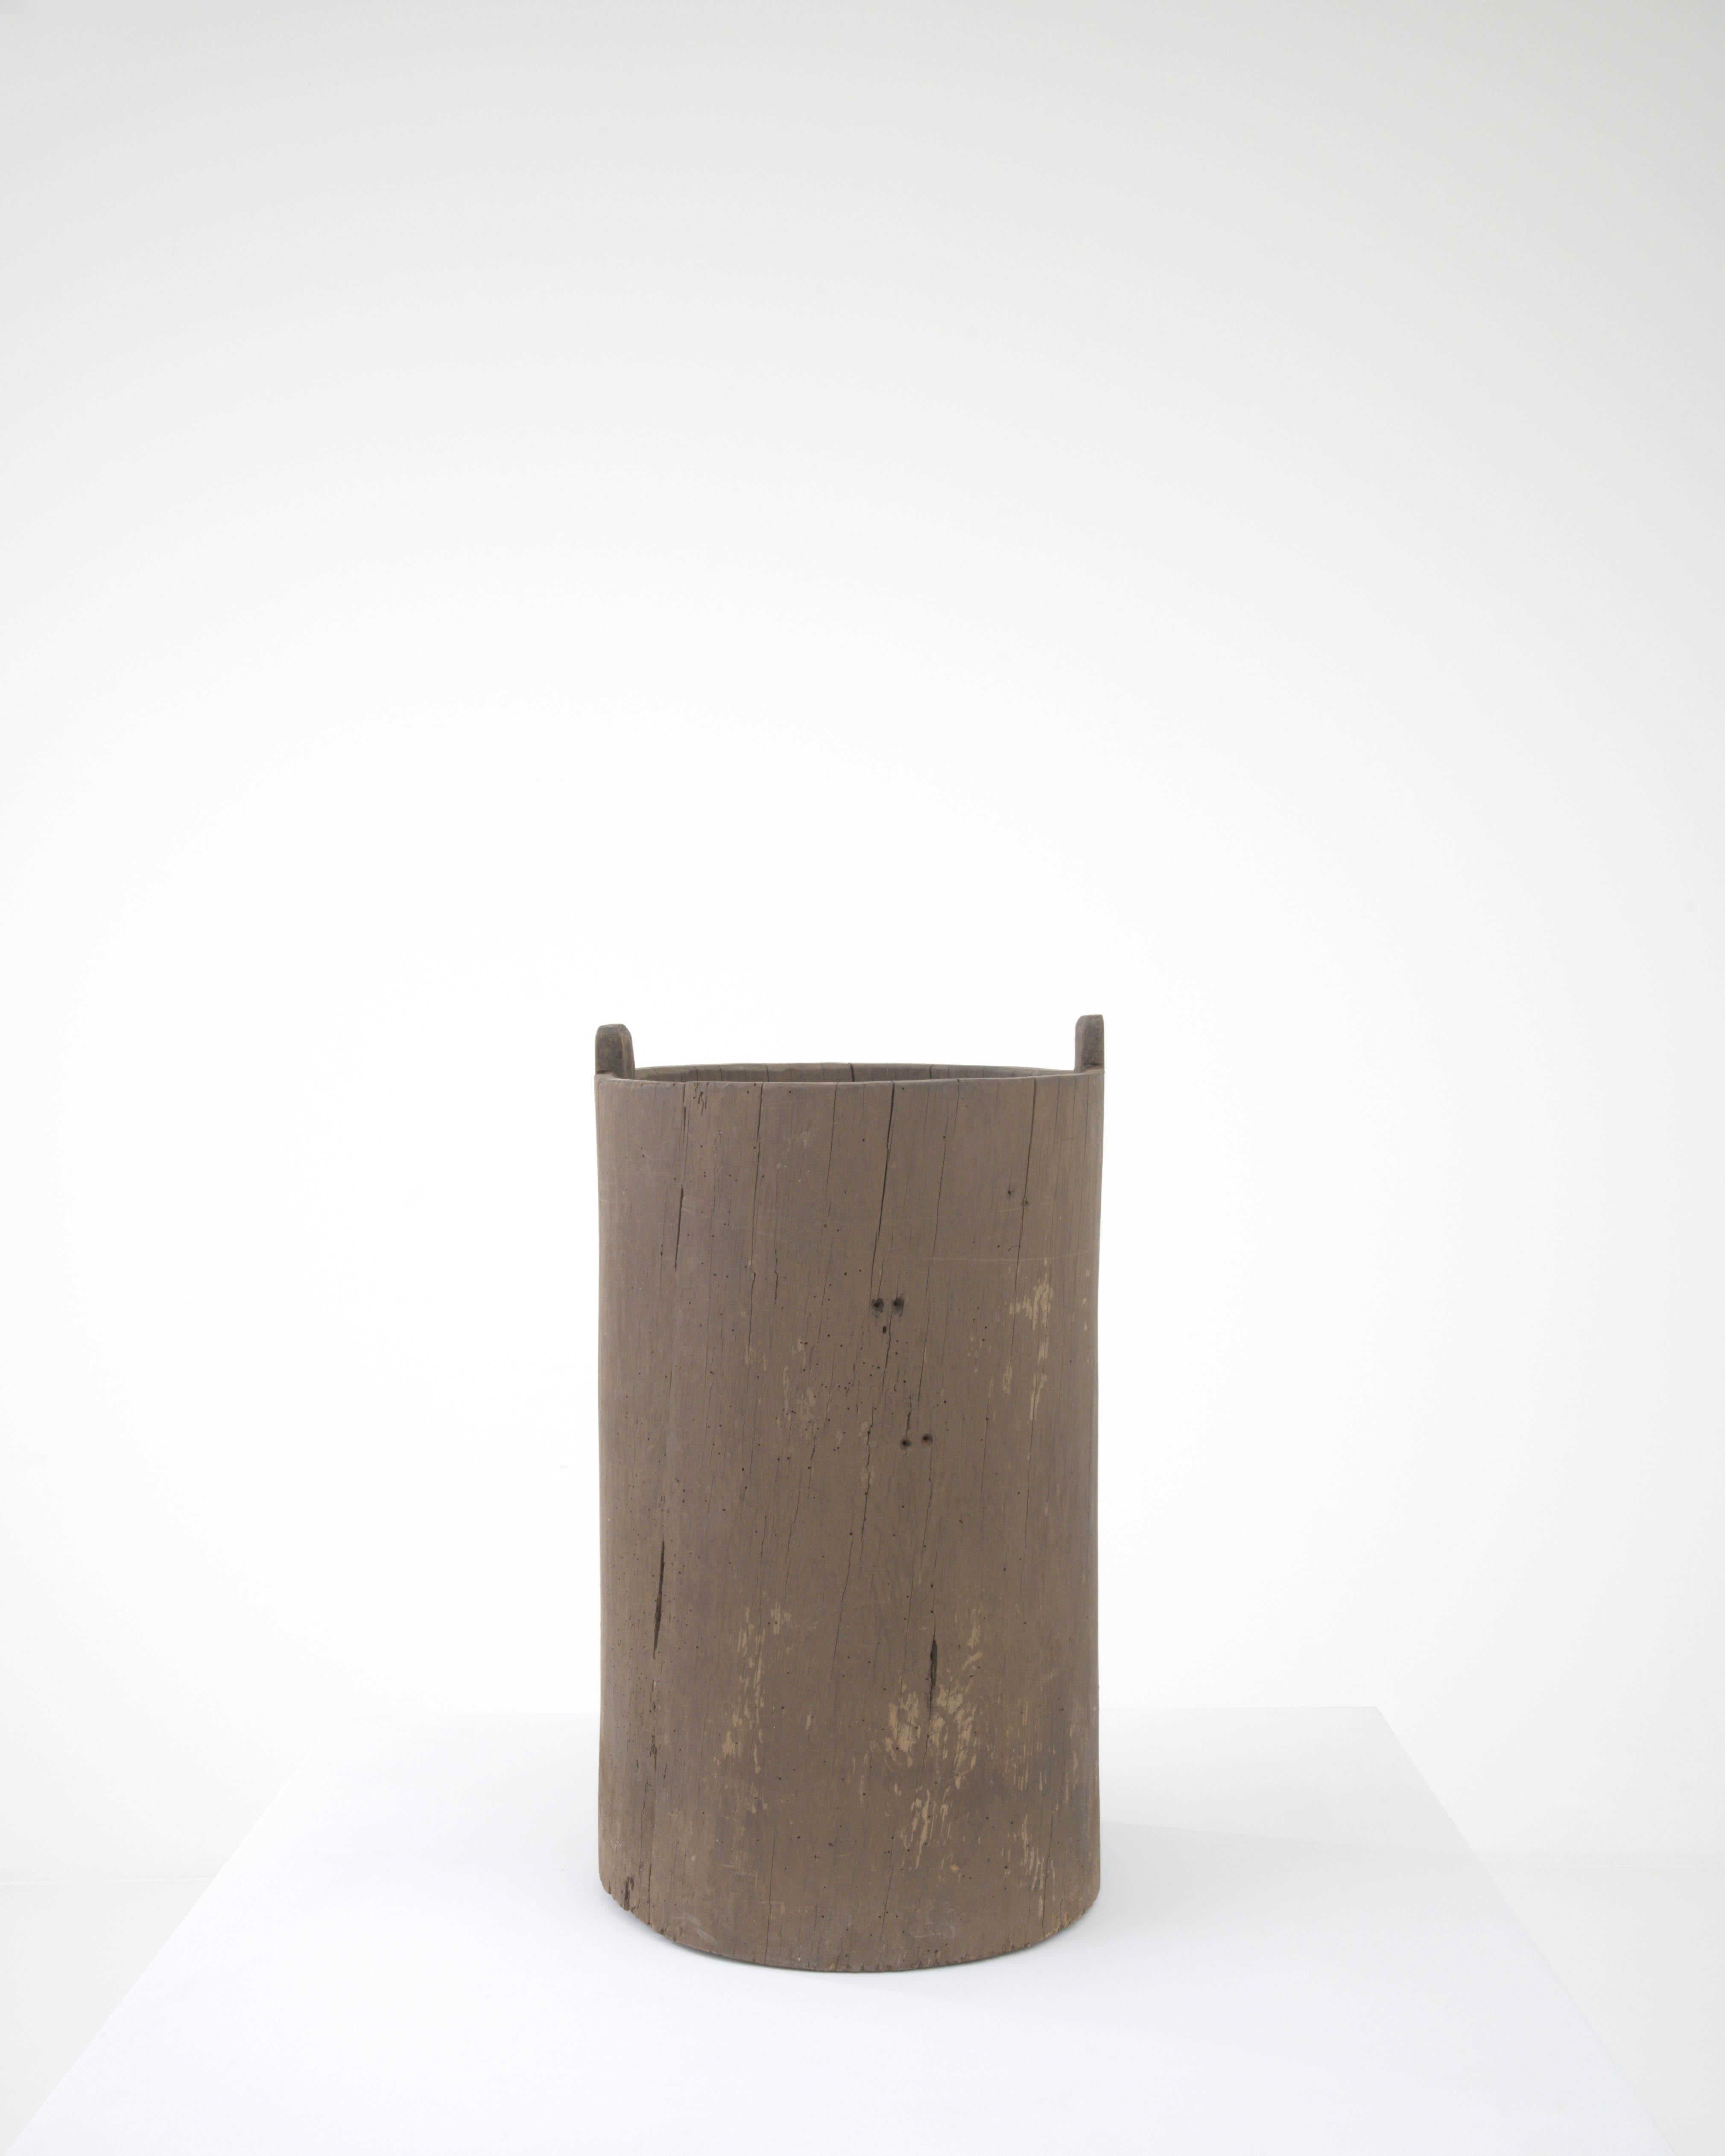 Behold the rustic allure of this 19th Century European Wooden Grain Container, a piece that embodies the simplicity and robustness of rural life. Crafted from solid wood, this container has weathered time, carrying with it a story of harvests past.